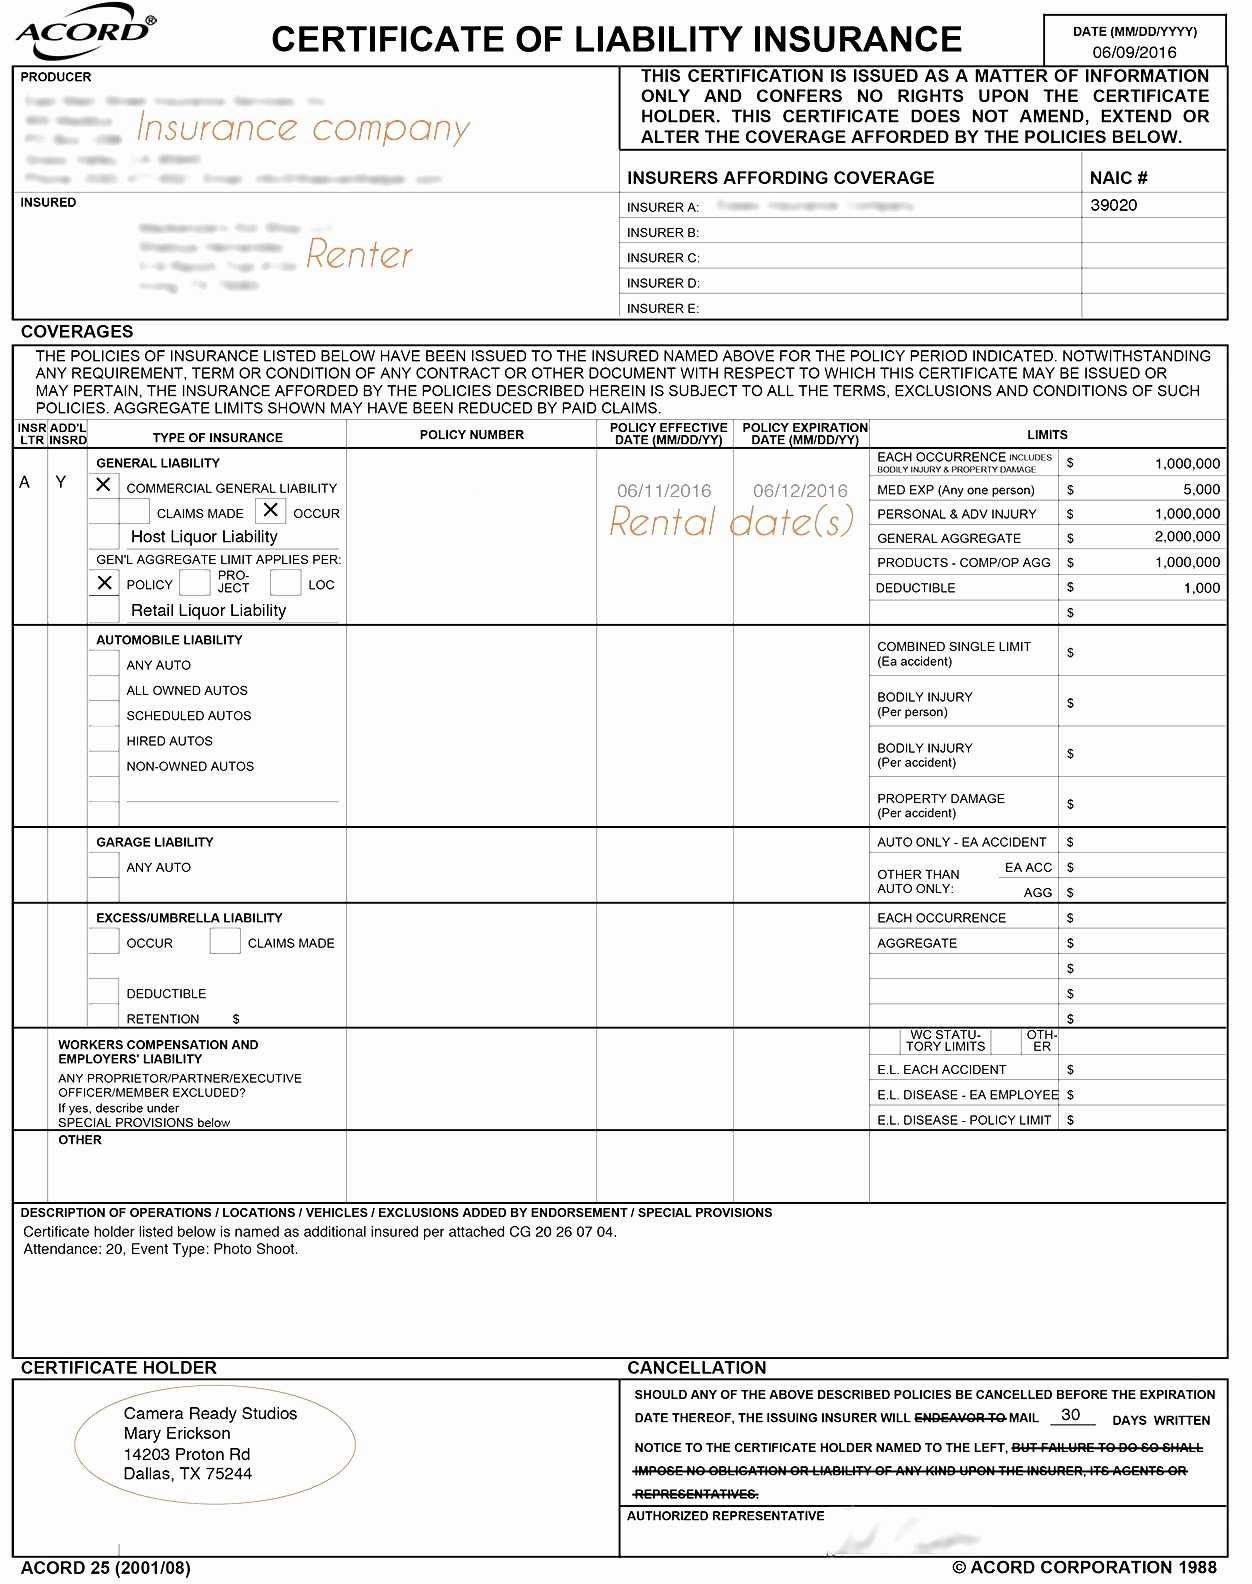 009 20Acord Form Fresh Certificate Liability Insurance Within Certificate Of Liability Insurance Template